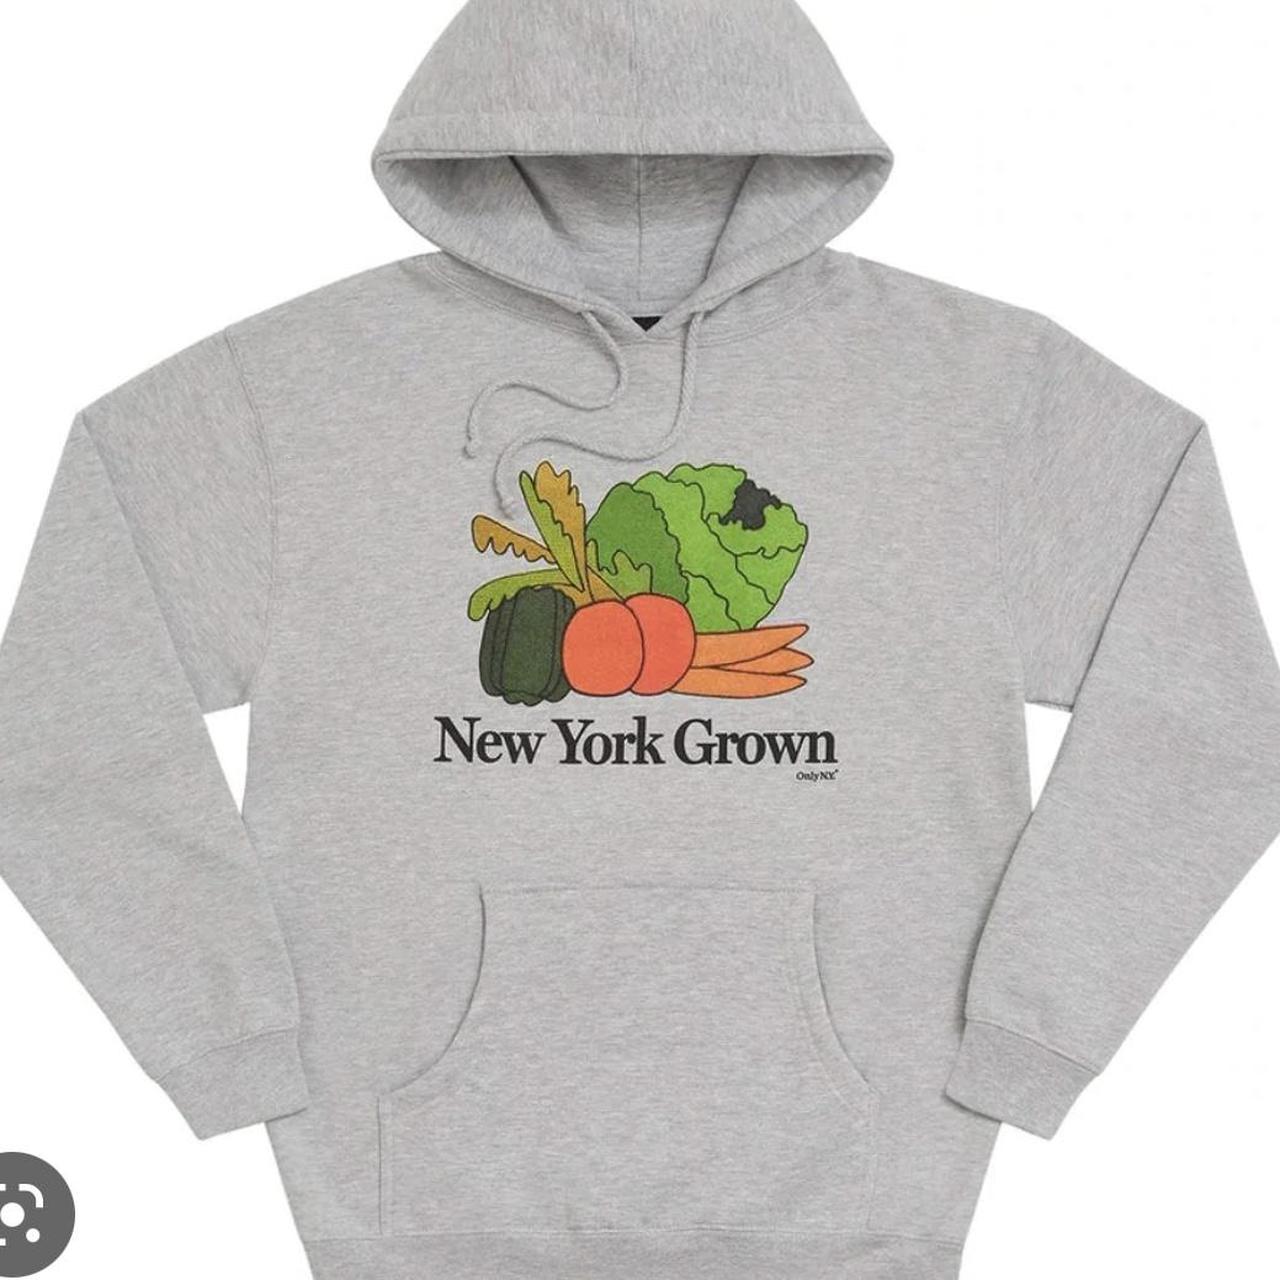 NYC City of New York Hoodie – Only NY